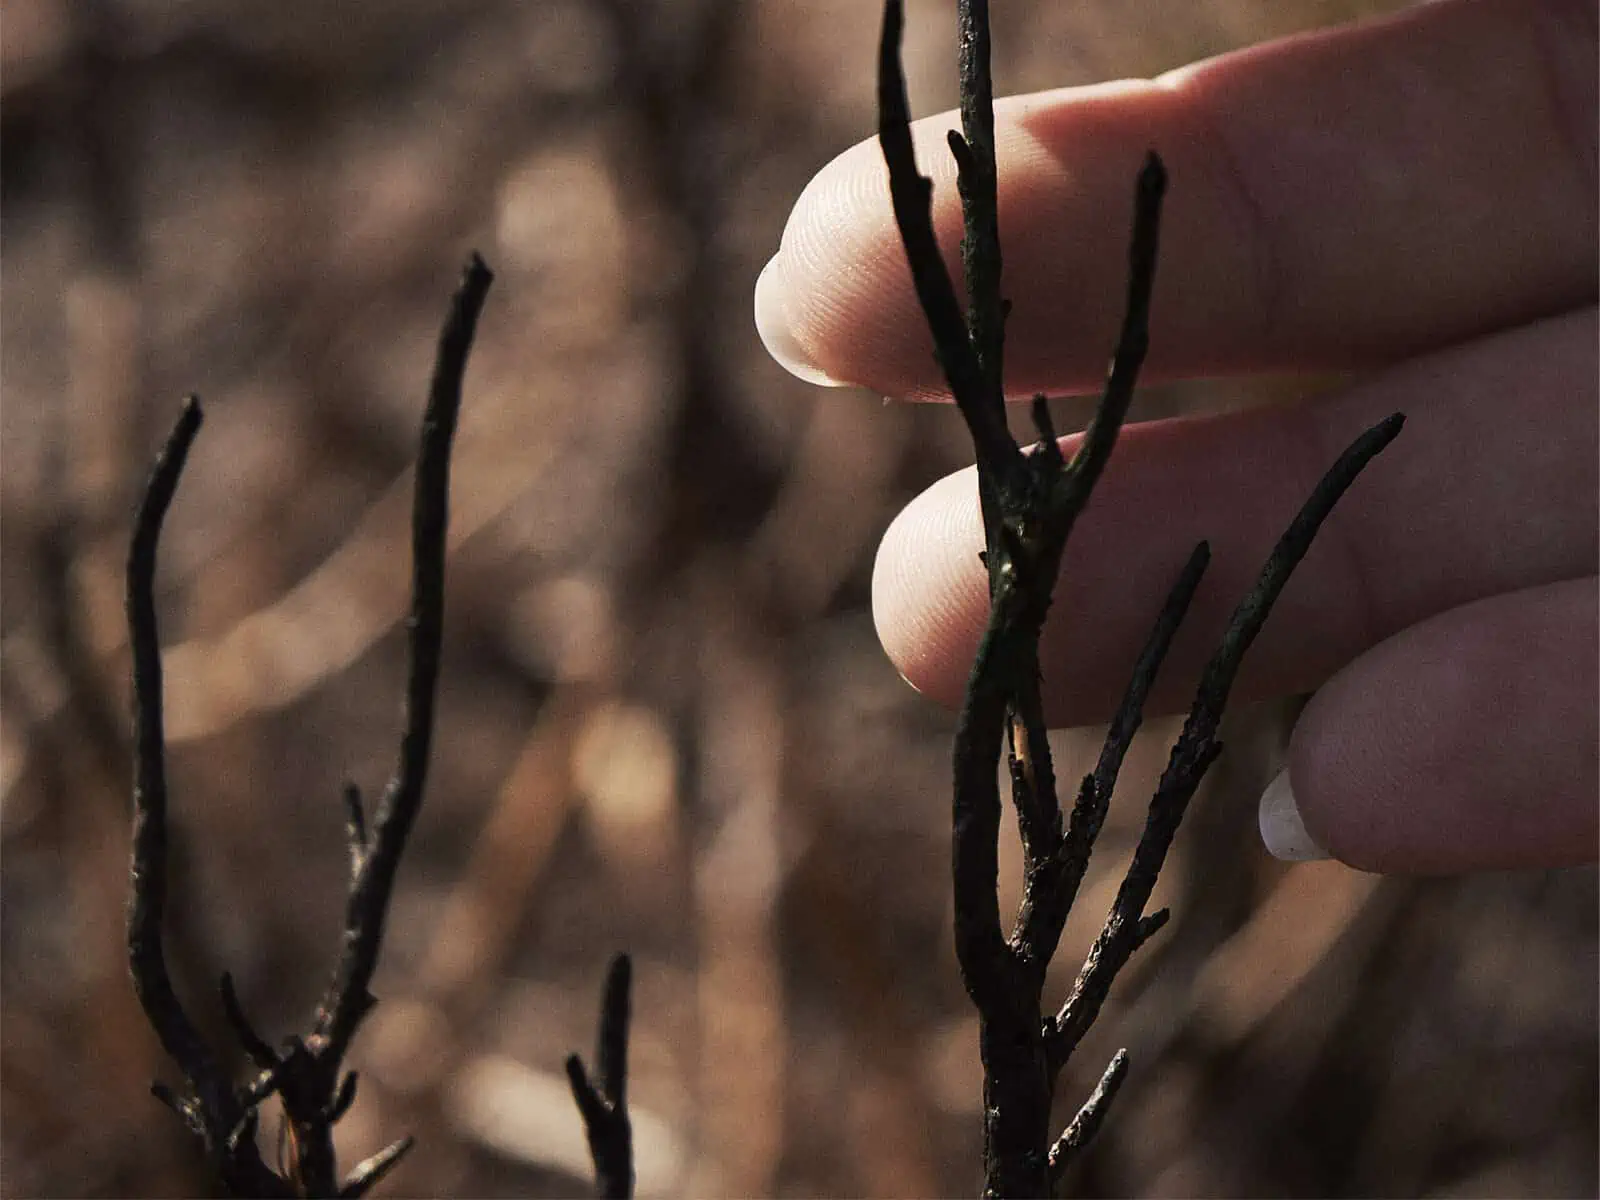 Image description: A landscape image. A close up of Fay’s hand holding a burnt strand of twig from a forest fire. The hand is on the right side of the image and in the background is out of focus foliage.